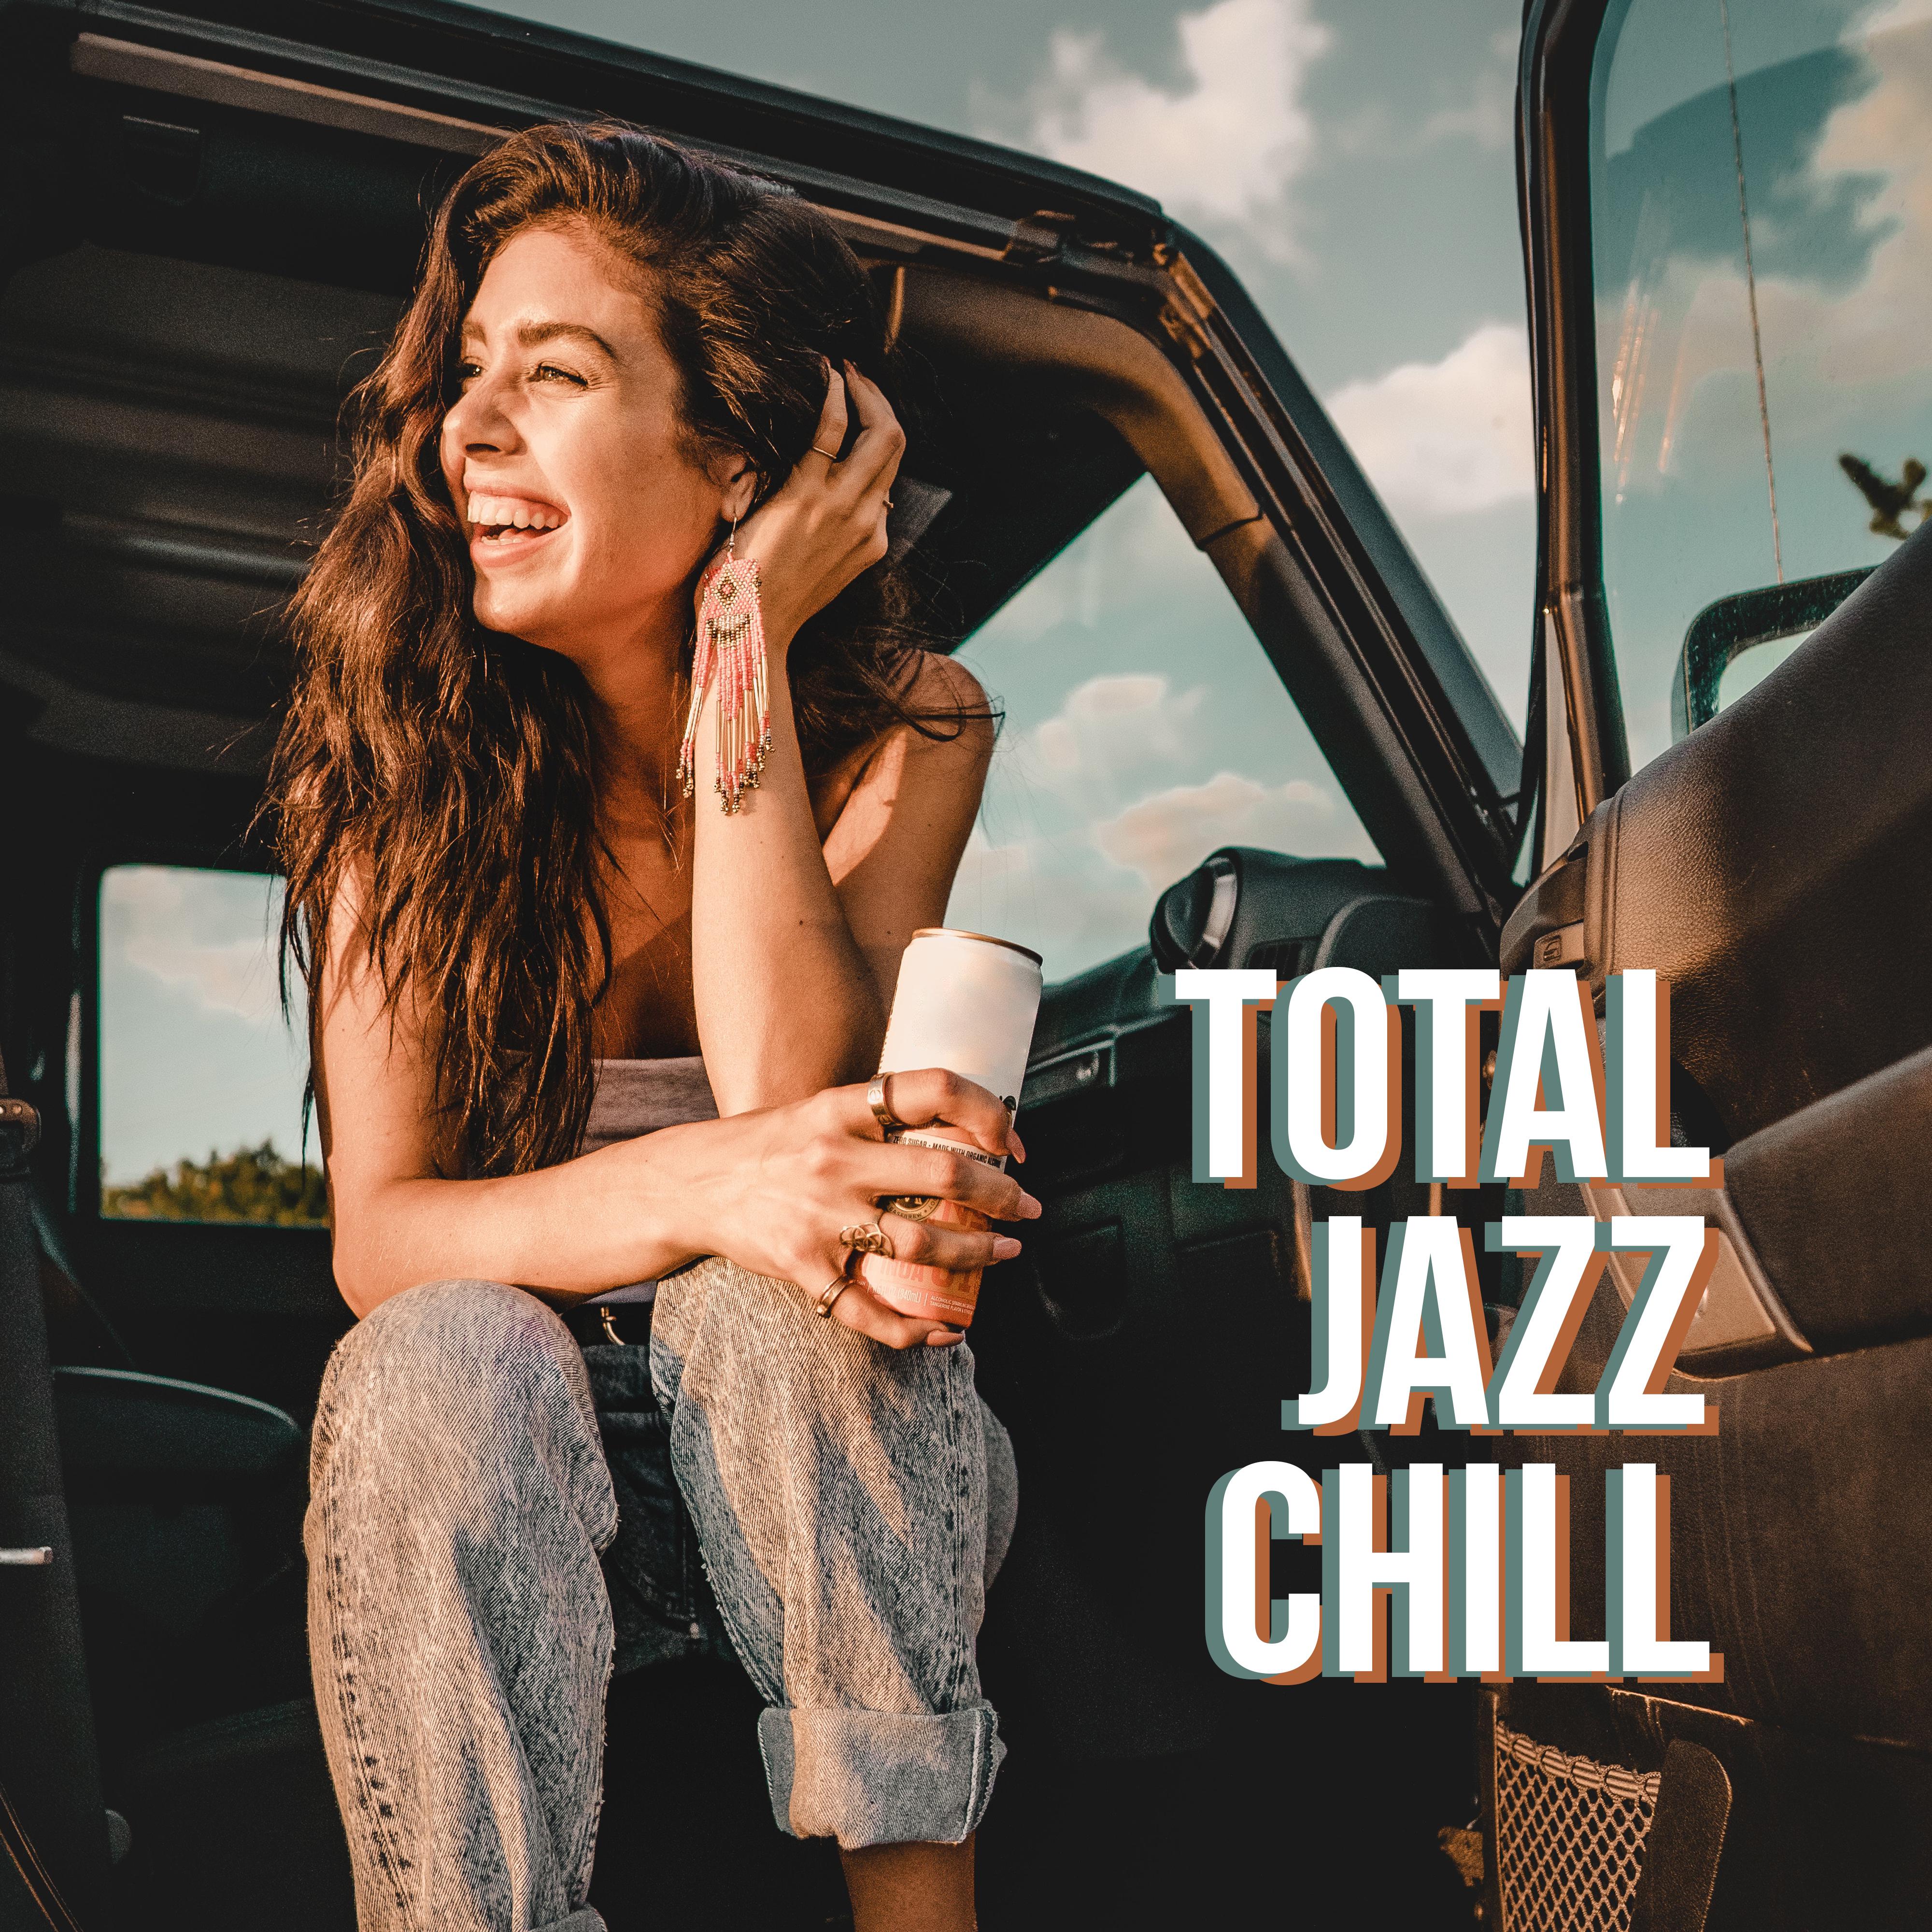 Total Jazz Chill – Smooth Jazz to Relax, Sleep, Stress Relief, Calm Vibes, Ambient Soothing Jazz, Smooth Jazz Coffee, Instrumental Music